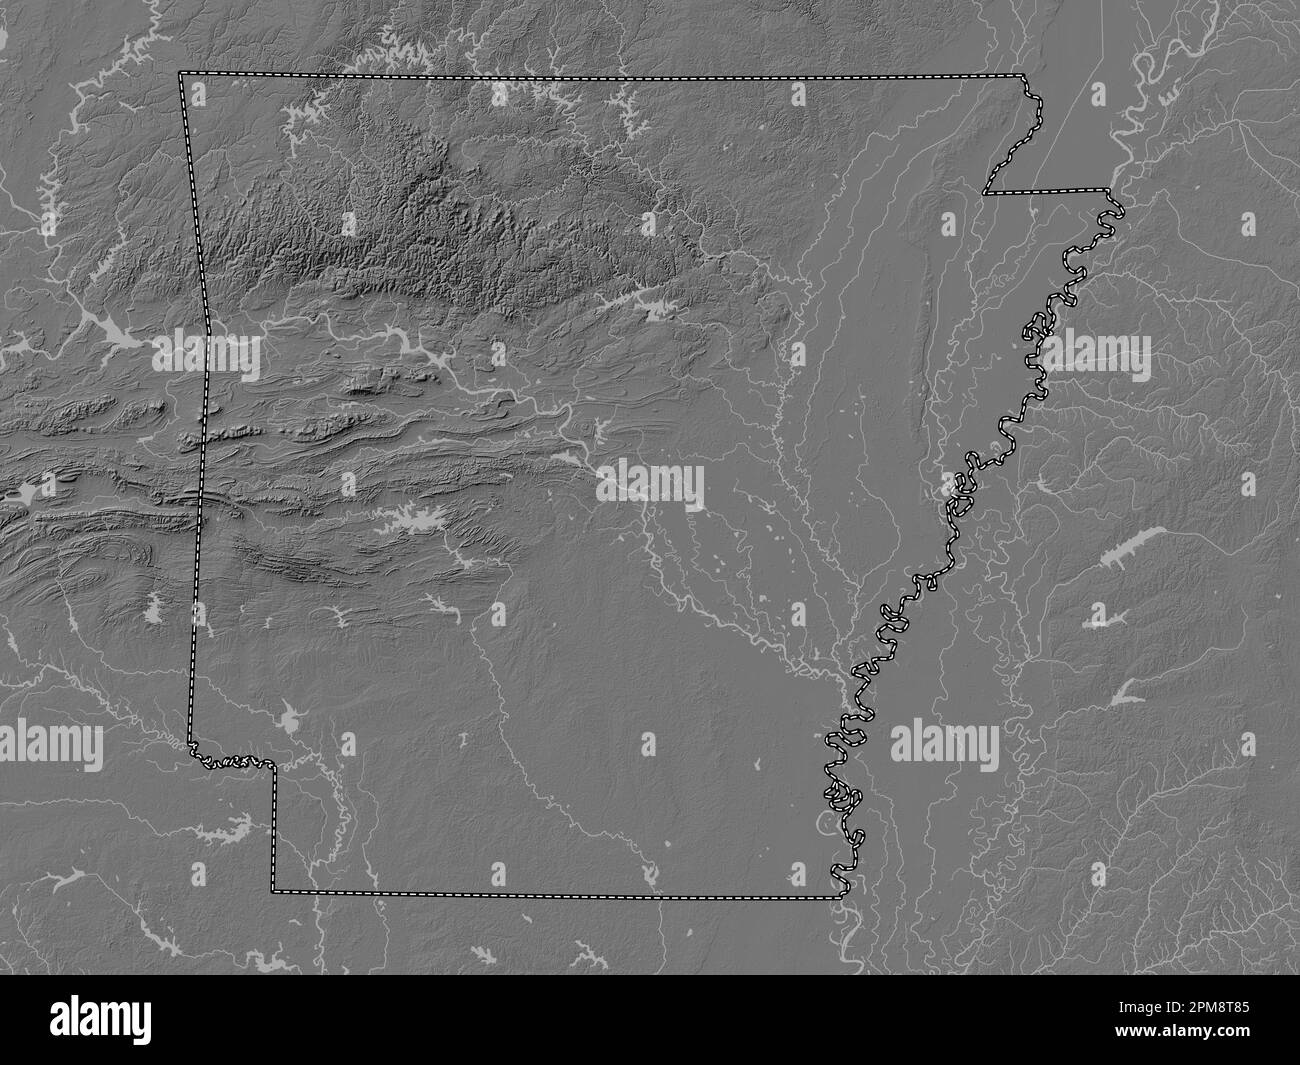 Arkansas, state of United States of America. Bilevel elevation map with lakes and rivers Stock Photo